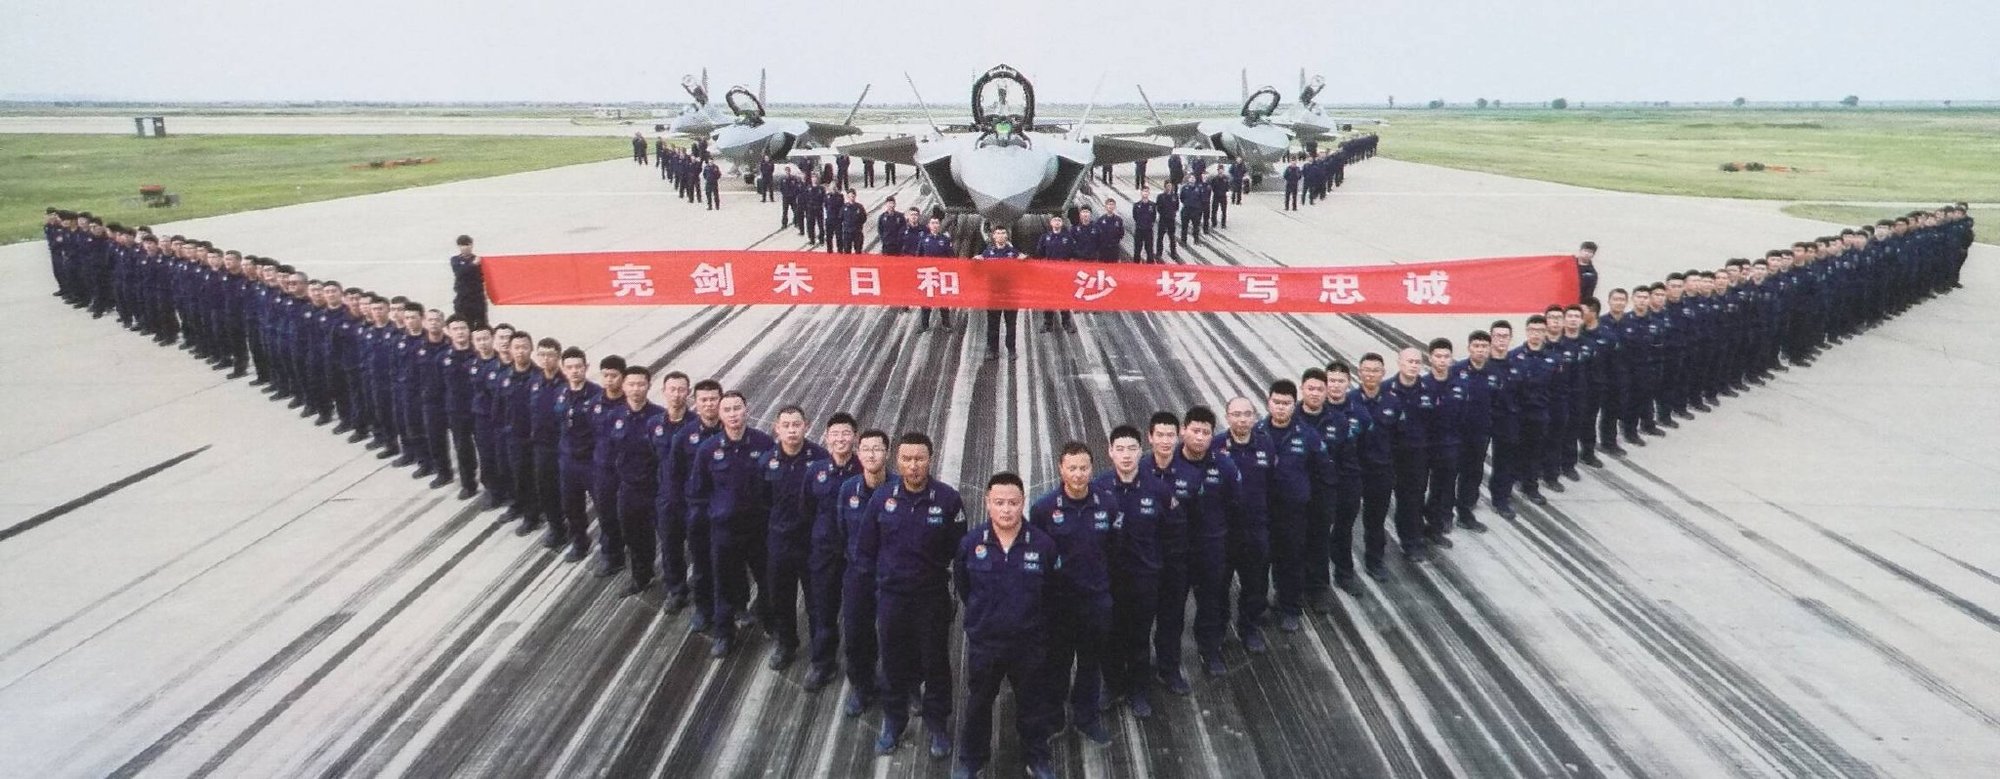 3×J-20 & 3×J-16, a formidable lineup in the PLA 90th anniversary parade.jpg